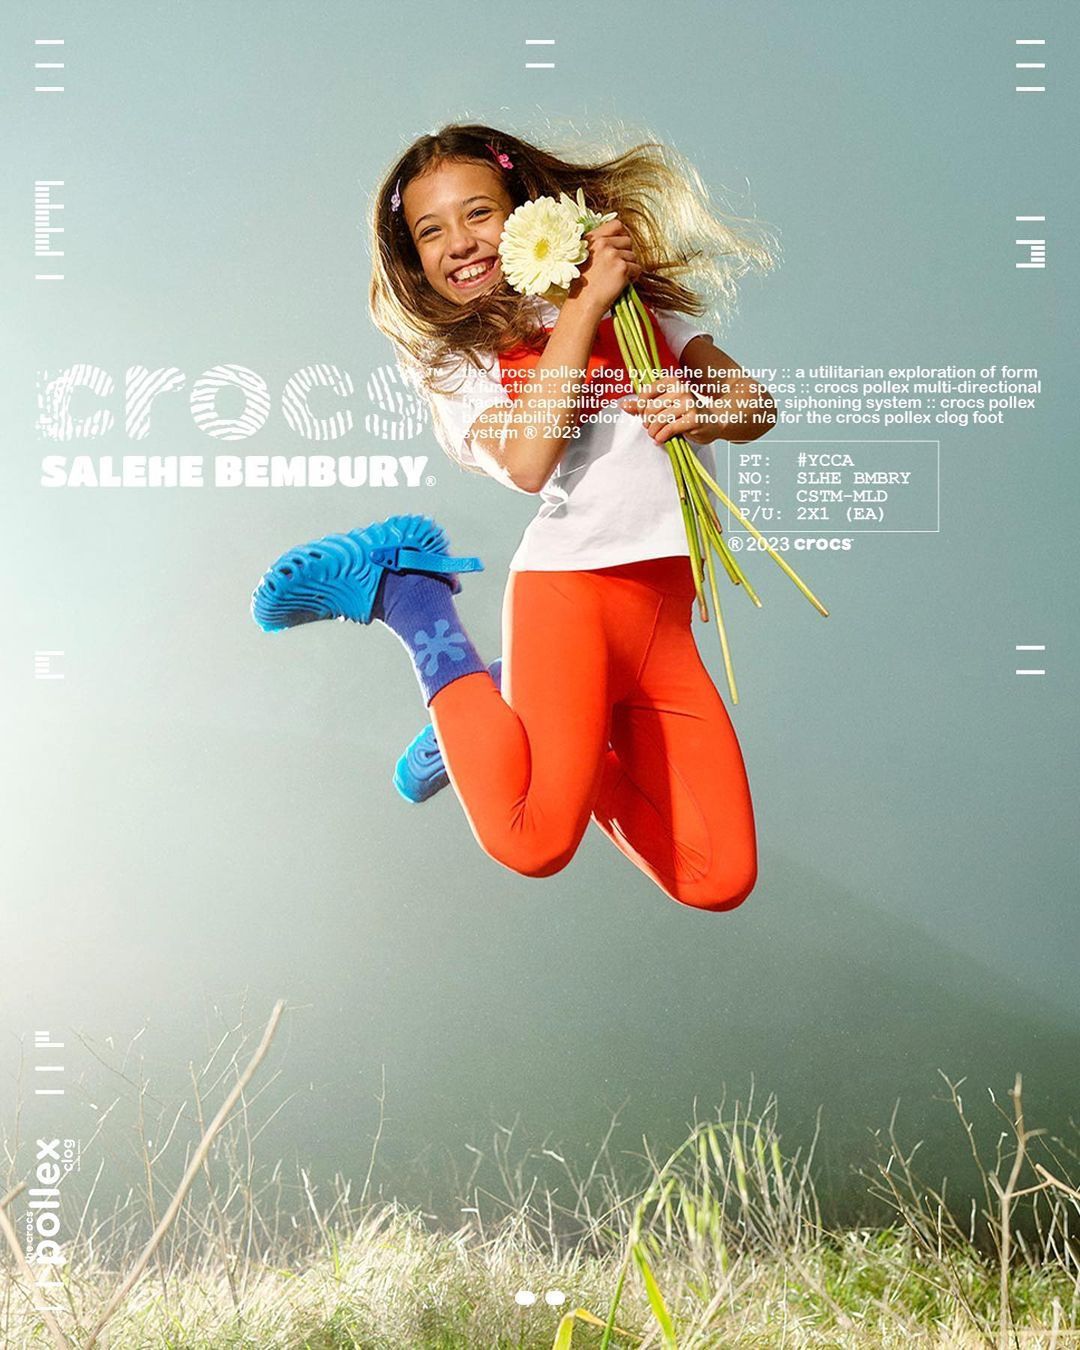 Salehe Bembury and Crocs to Release a Pollex Clog Collection Exclusively  for Kids